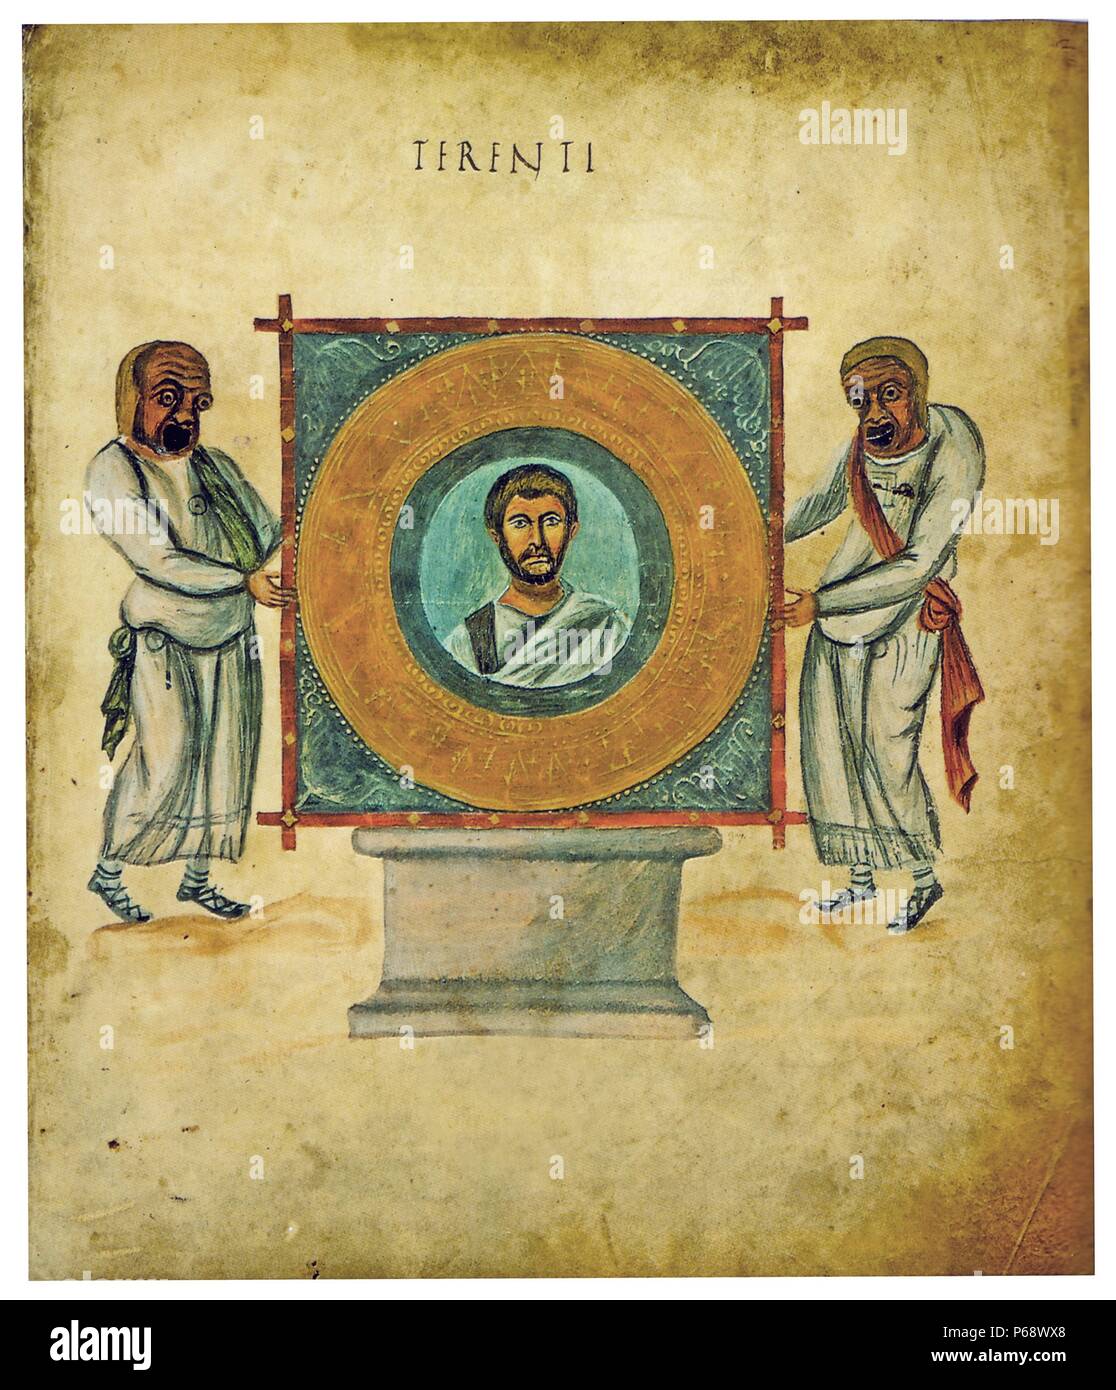 The Vatican Terence (Terentius Vaticanus), or Codex Vaticanus Latinus. 9th-century illuminated manuscript of the Latin comedies of Publius Terentius Afer, housed in the Vatican Library. According to art-historical analysis the manuscript was copied from a model of the 3rd century Stock Photo